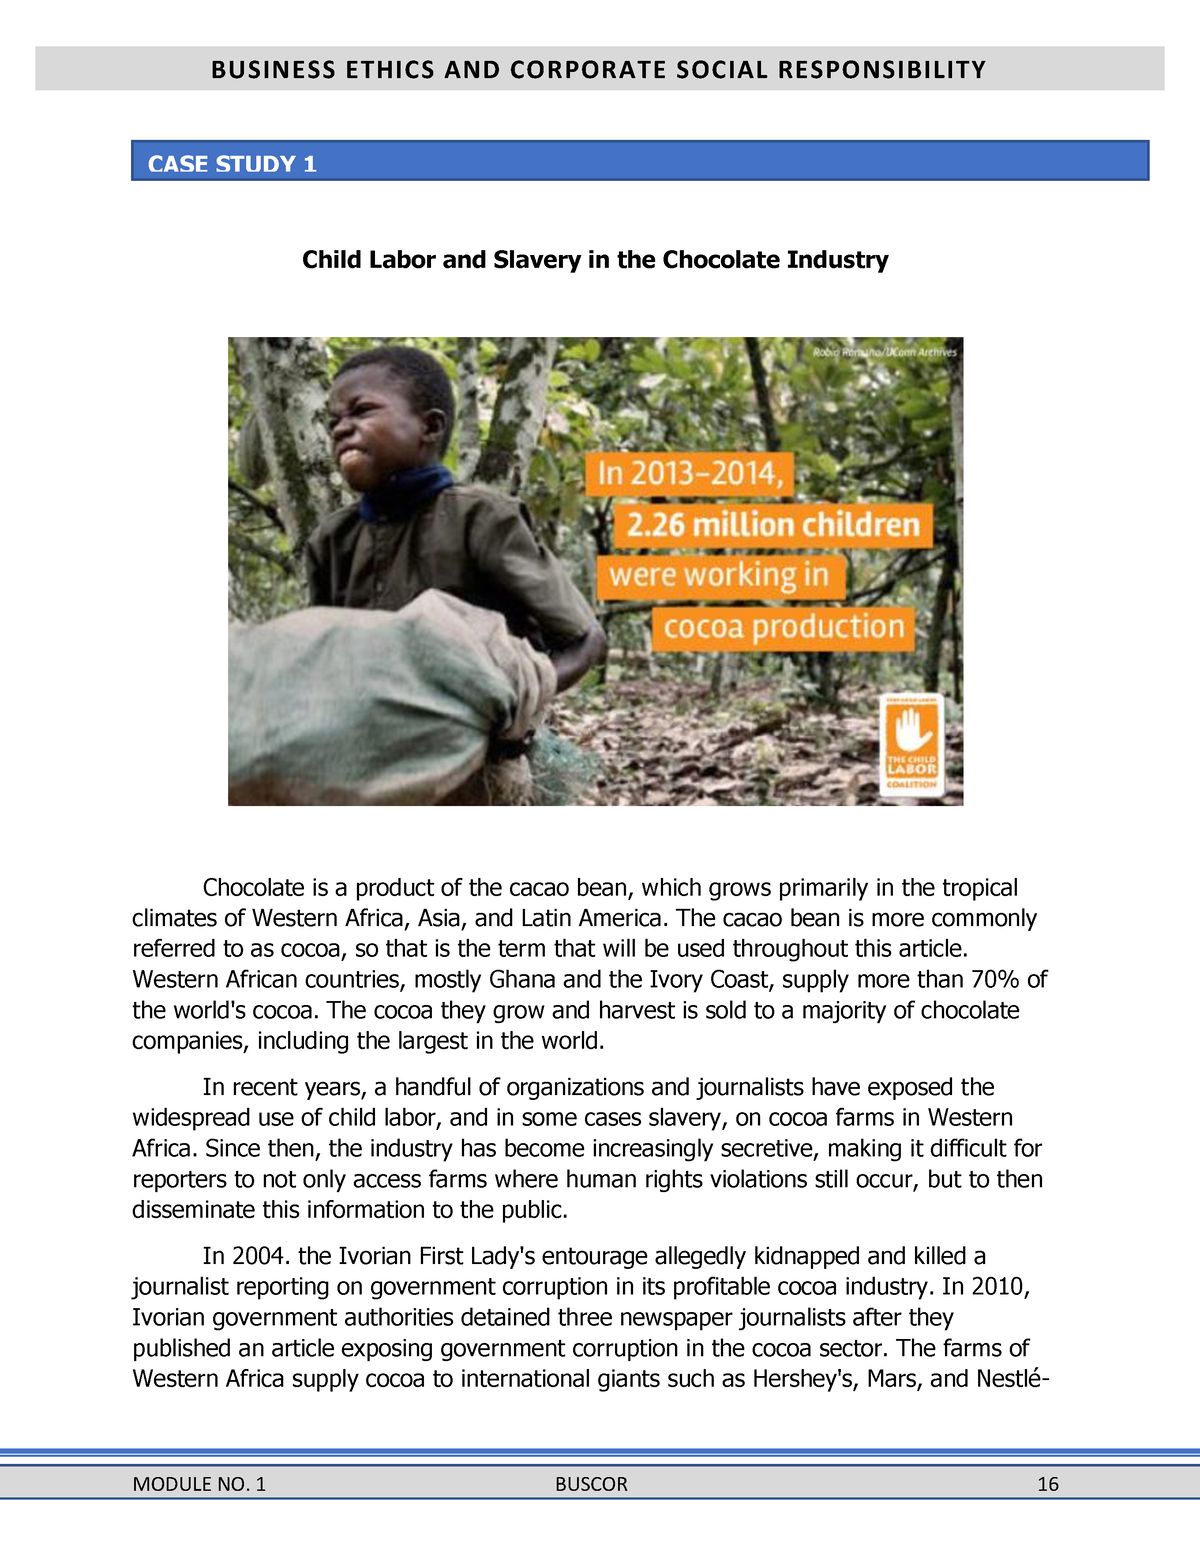 child labor and slavery in the chocolate industry case study